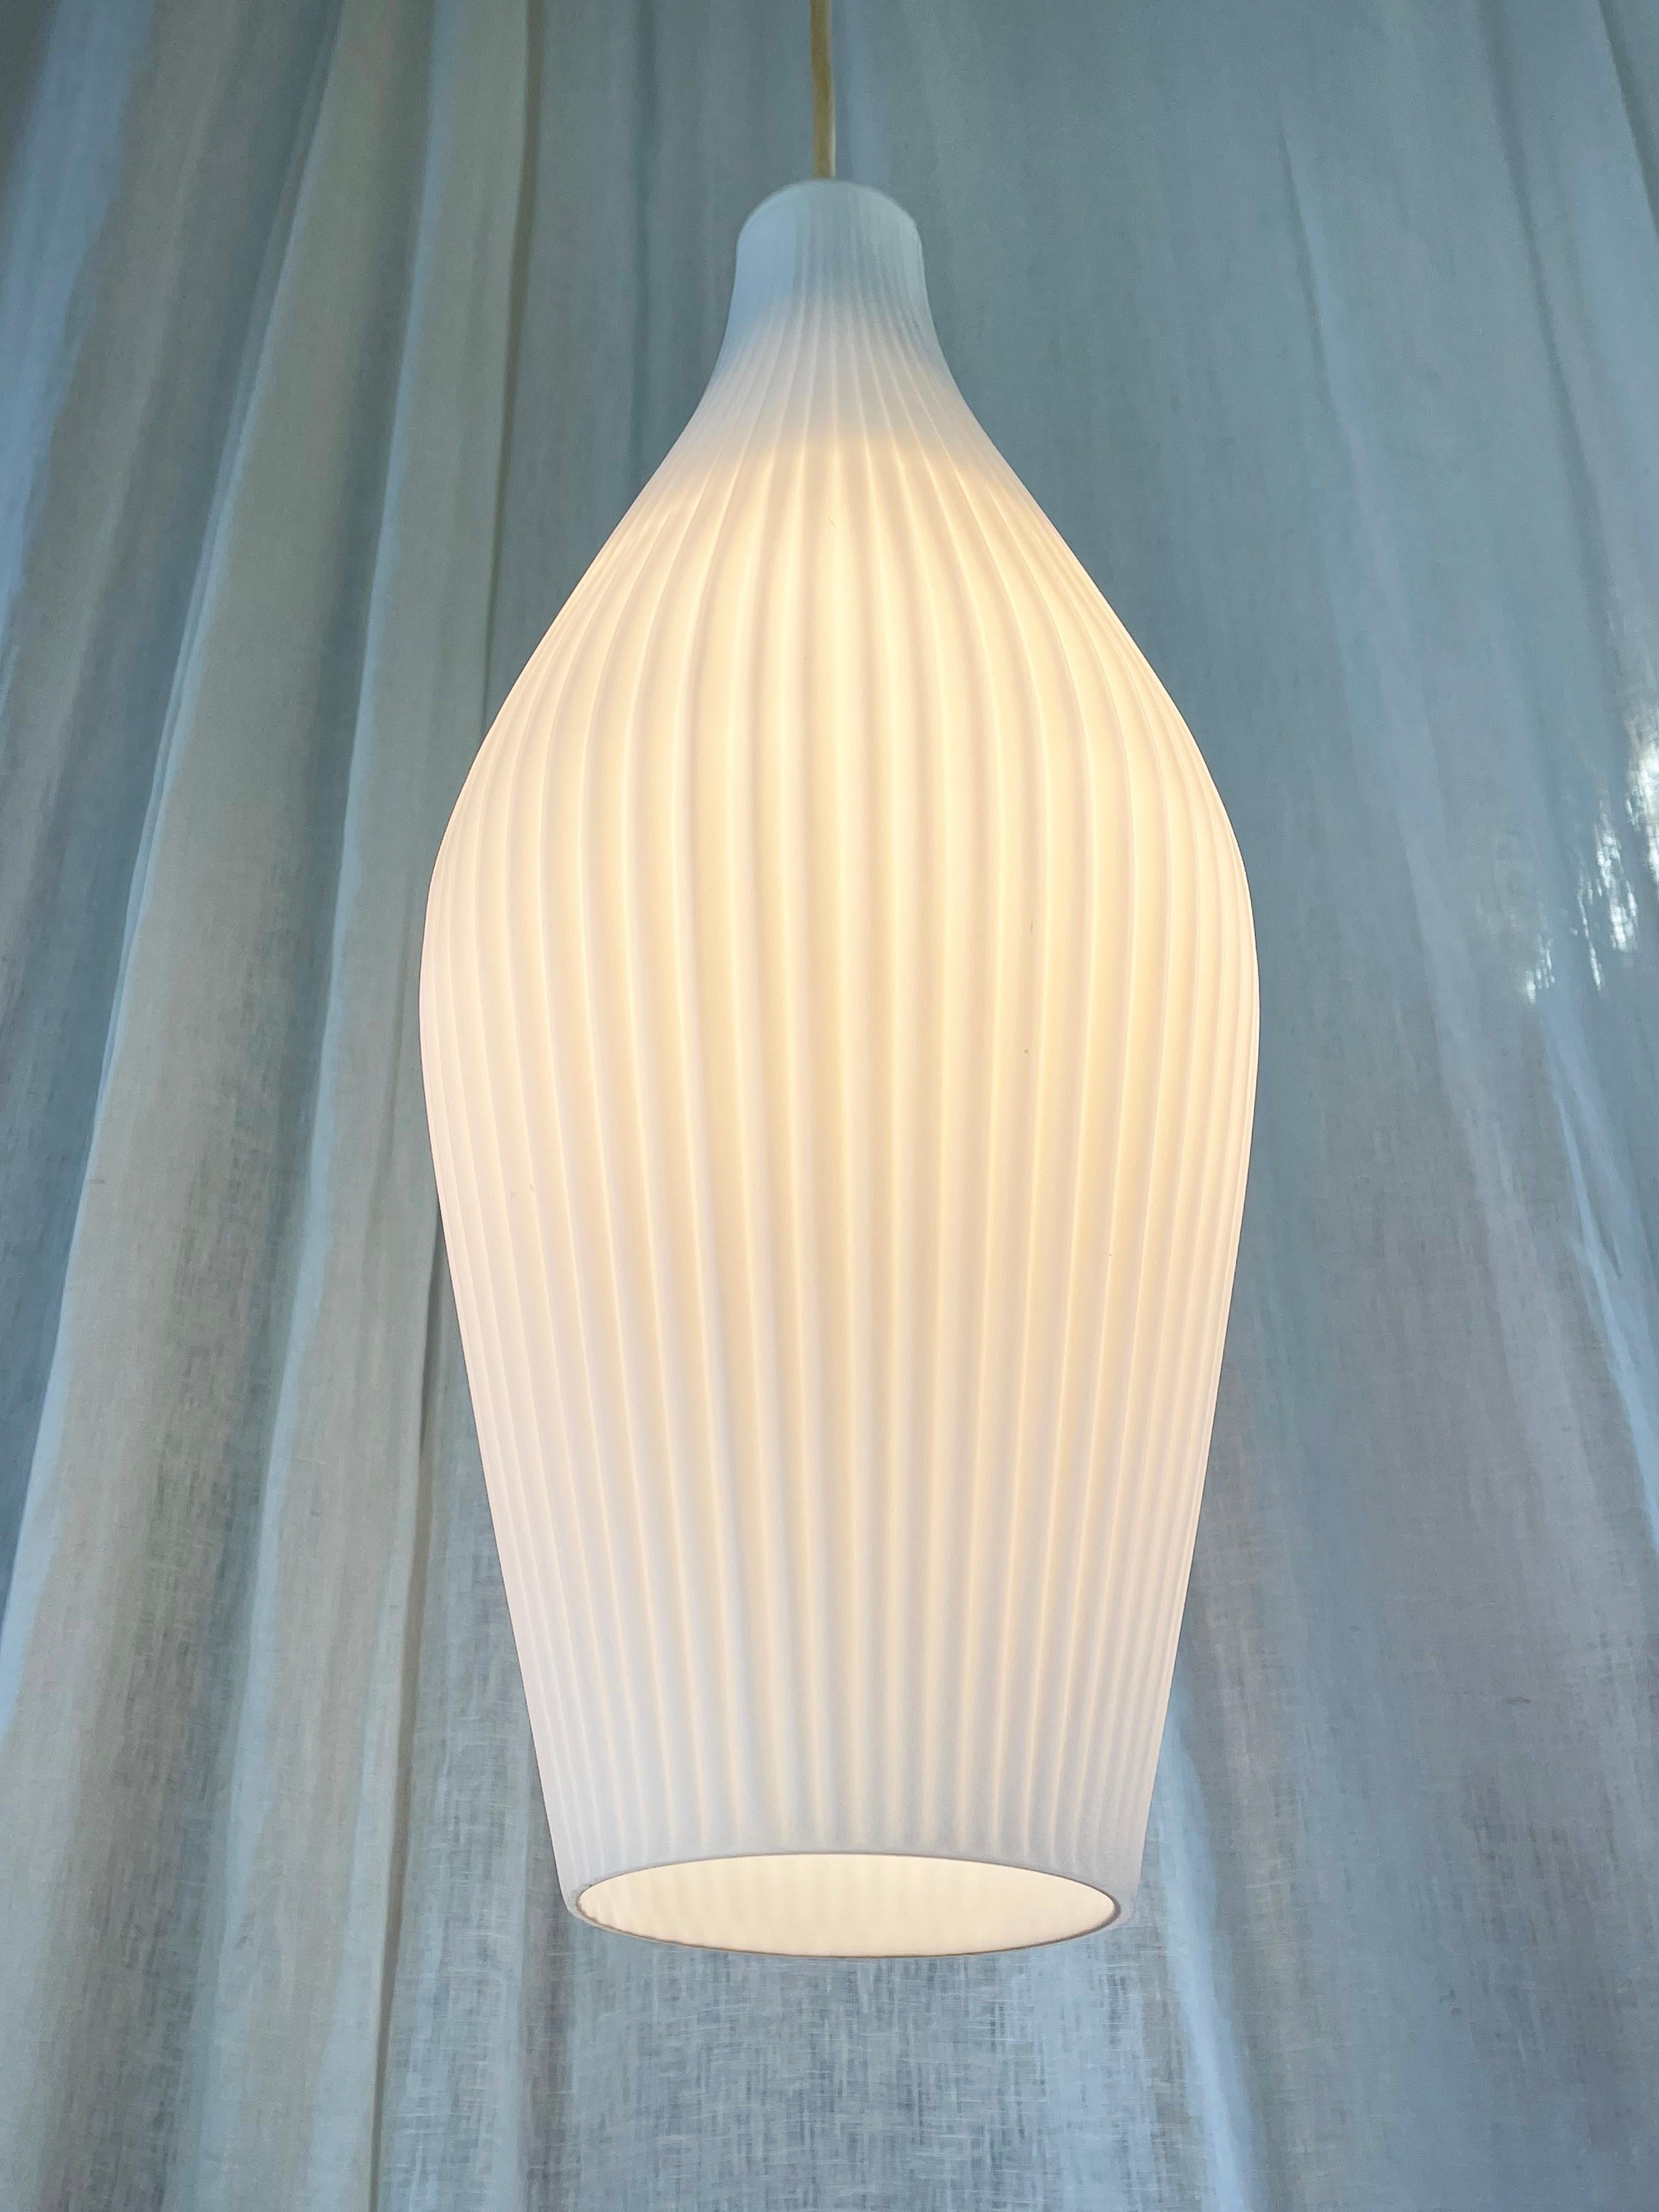 Machine-Made Mid Century Opal Glass Pendant Lamp 'Granada' by Gangkofner for Peill & Putzler For Sale